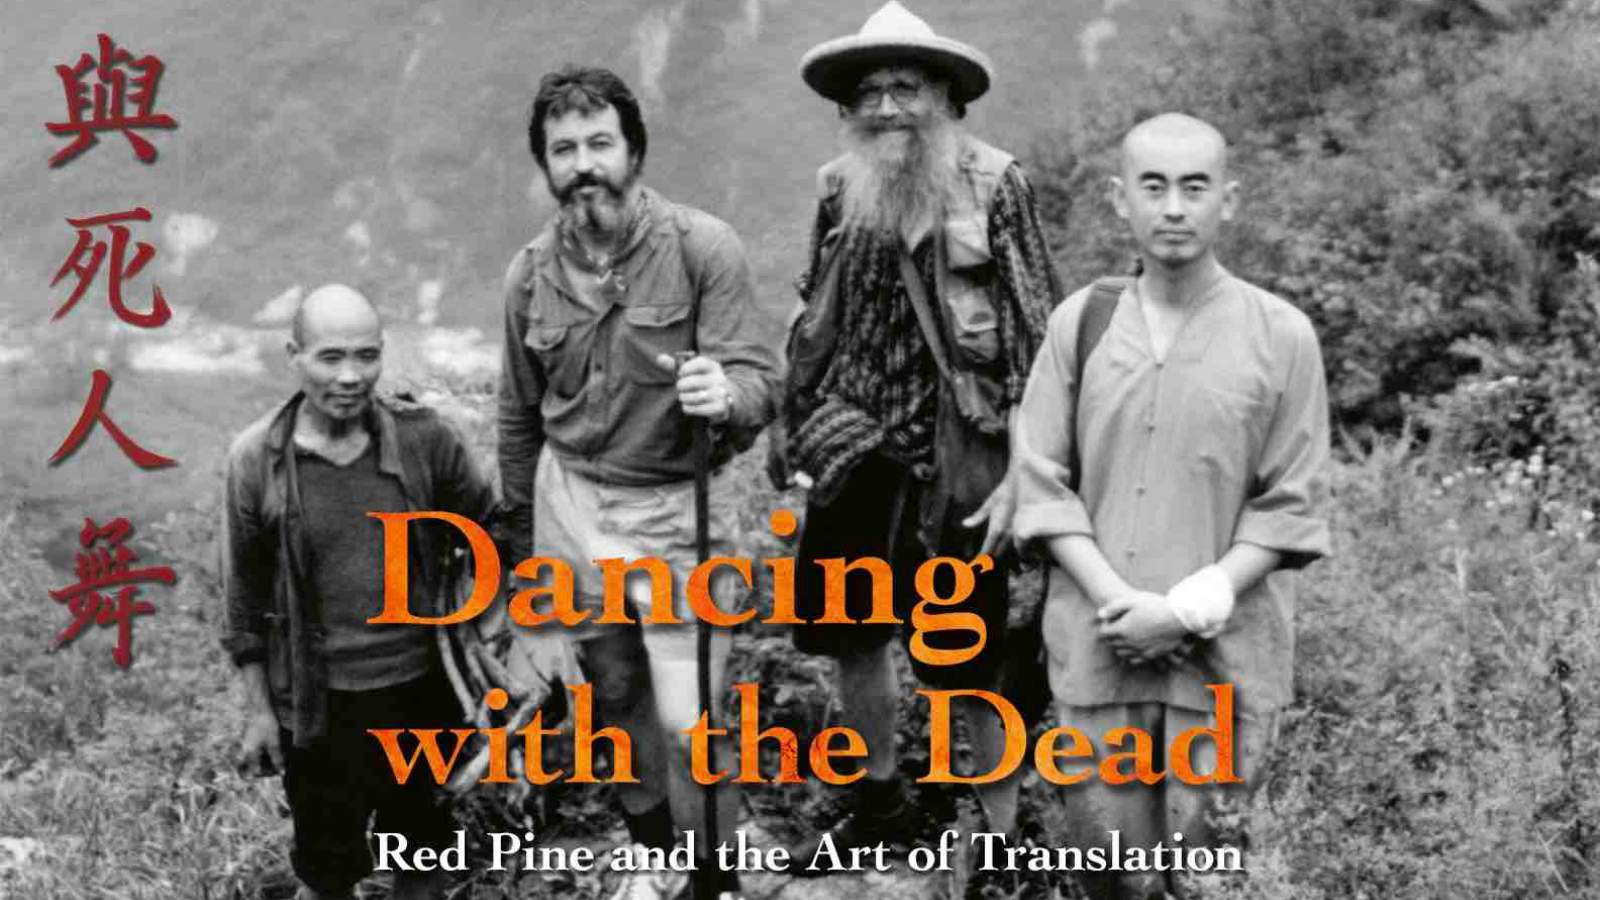 Dancing with the Dead: Red Pine and the Art of Translation